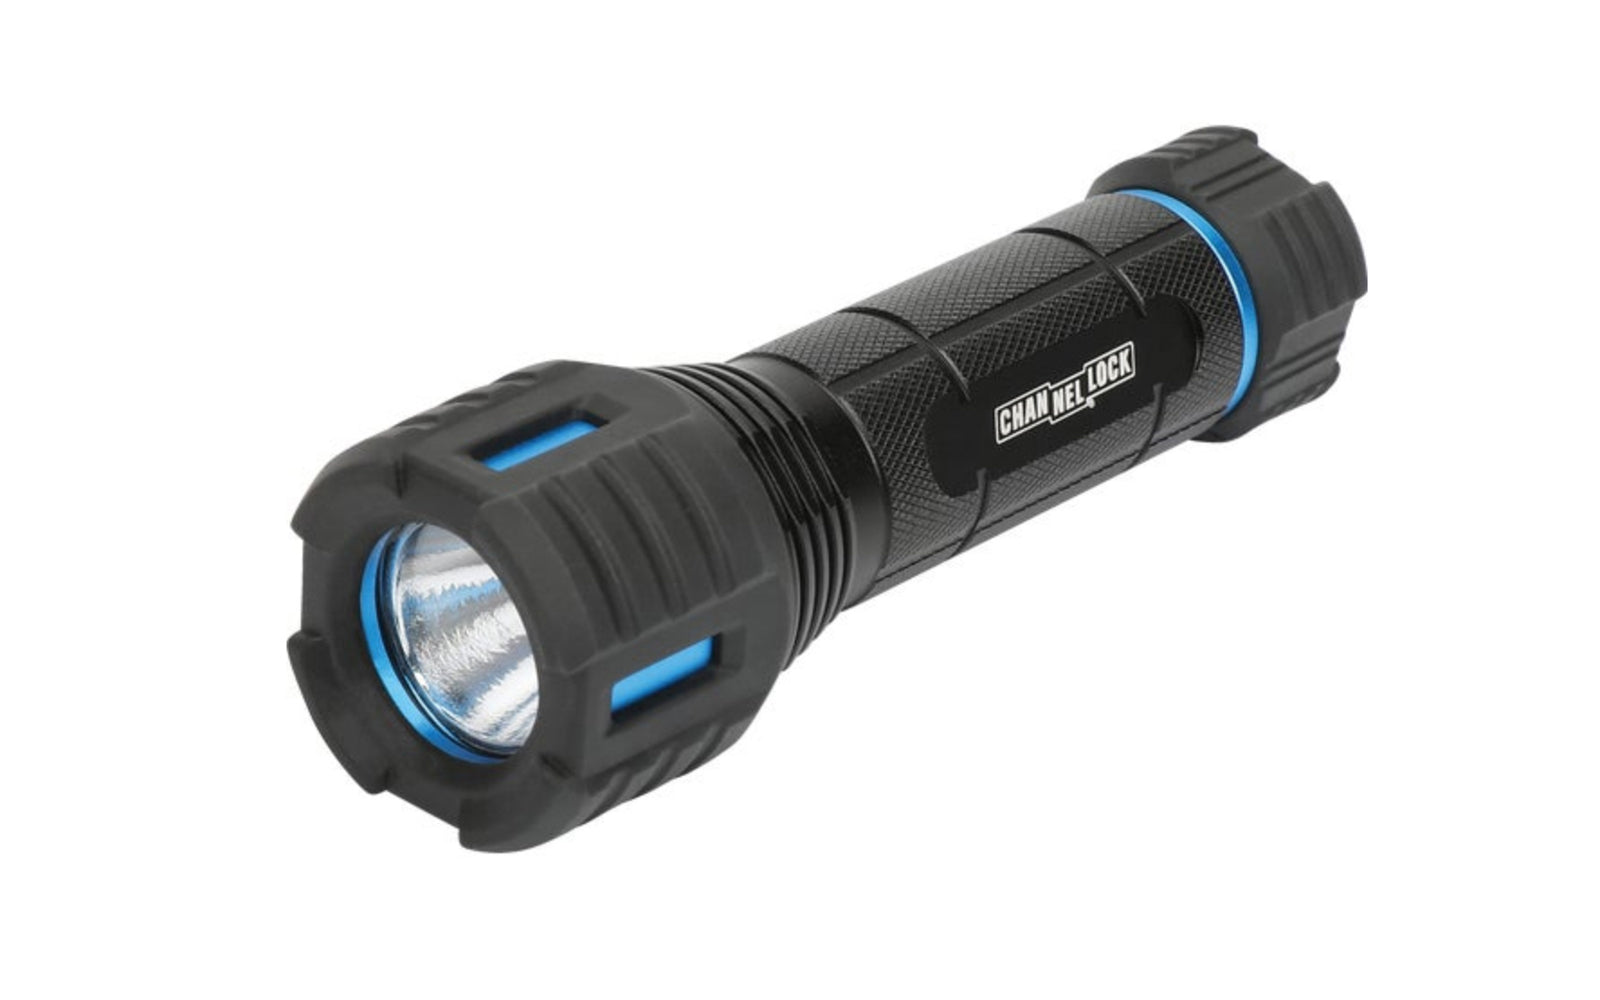 Channellock Flashlight - 165 Lumens. Full aluminum body with rubber head and tail cap to absorb impact. High performance LED (light emitting diode) with high, low, and strobe settings. Made by Channelock.